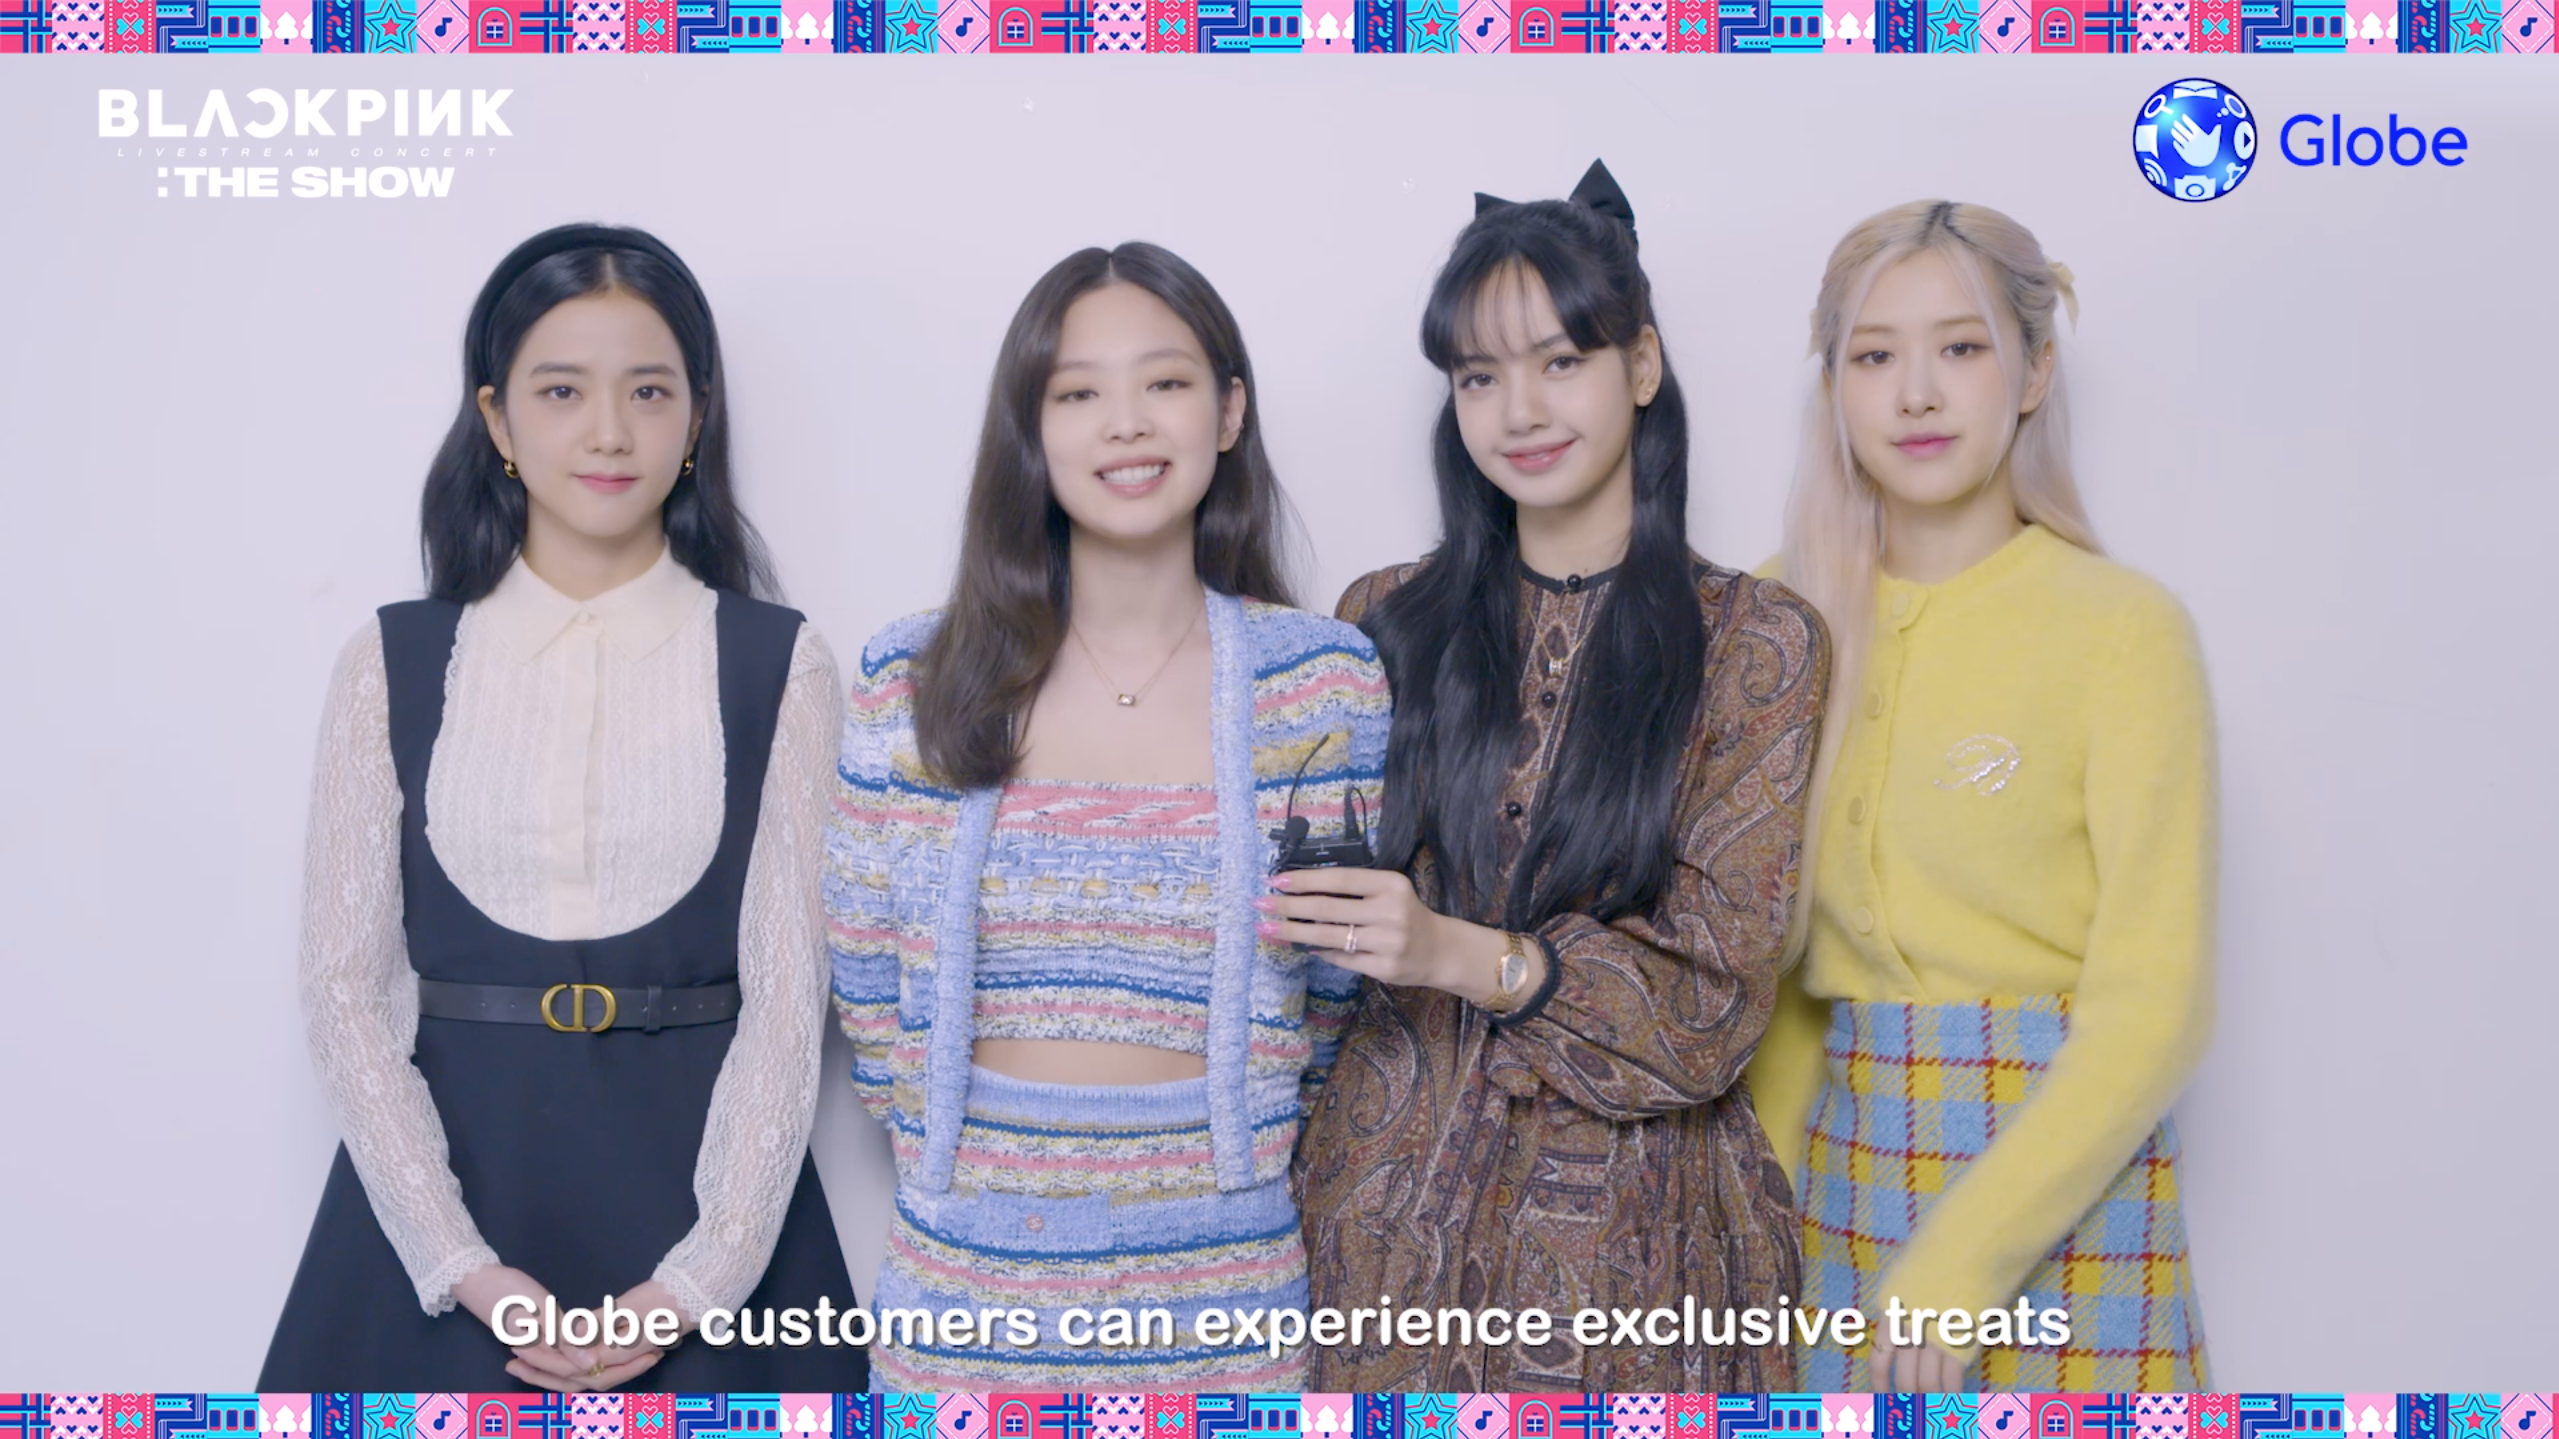 BLACKPINK - 'THE SHOW' MESSAGE VIDEO #2